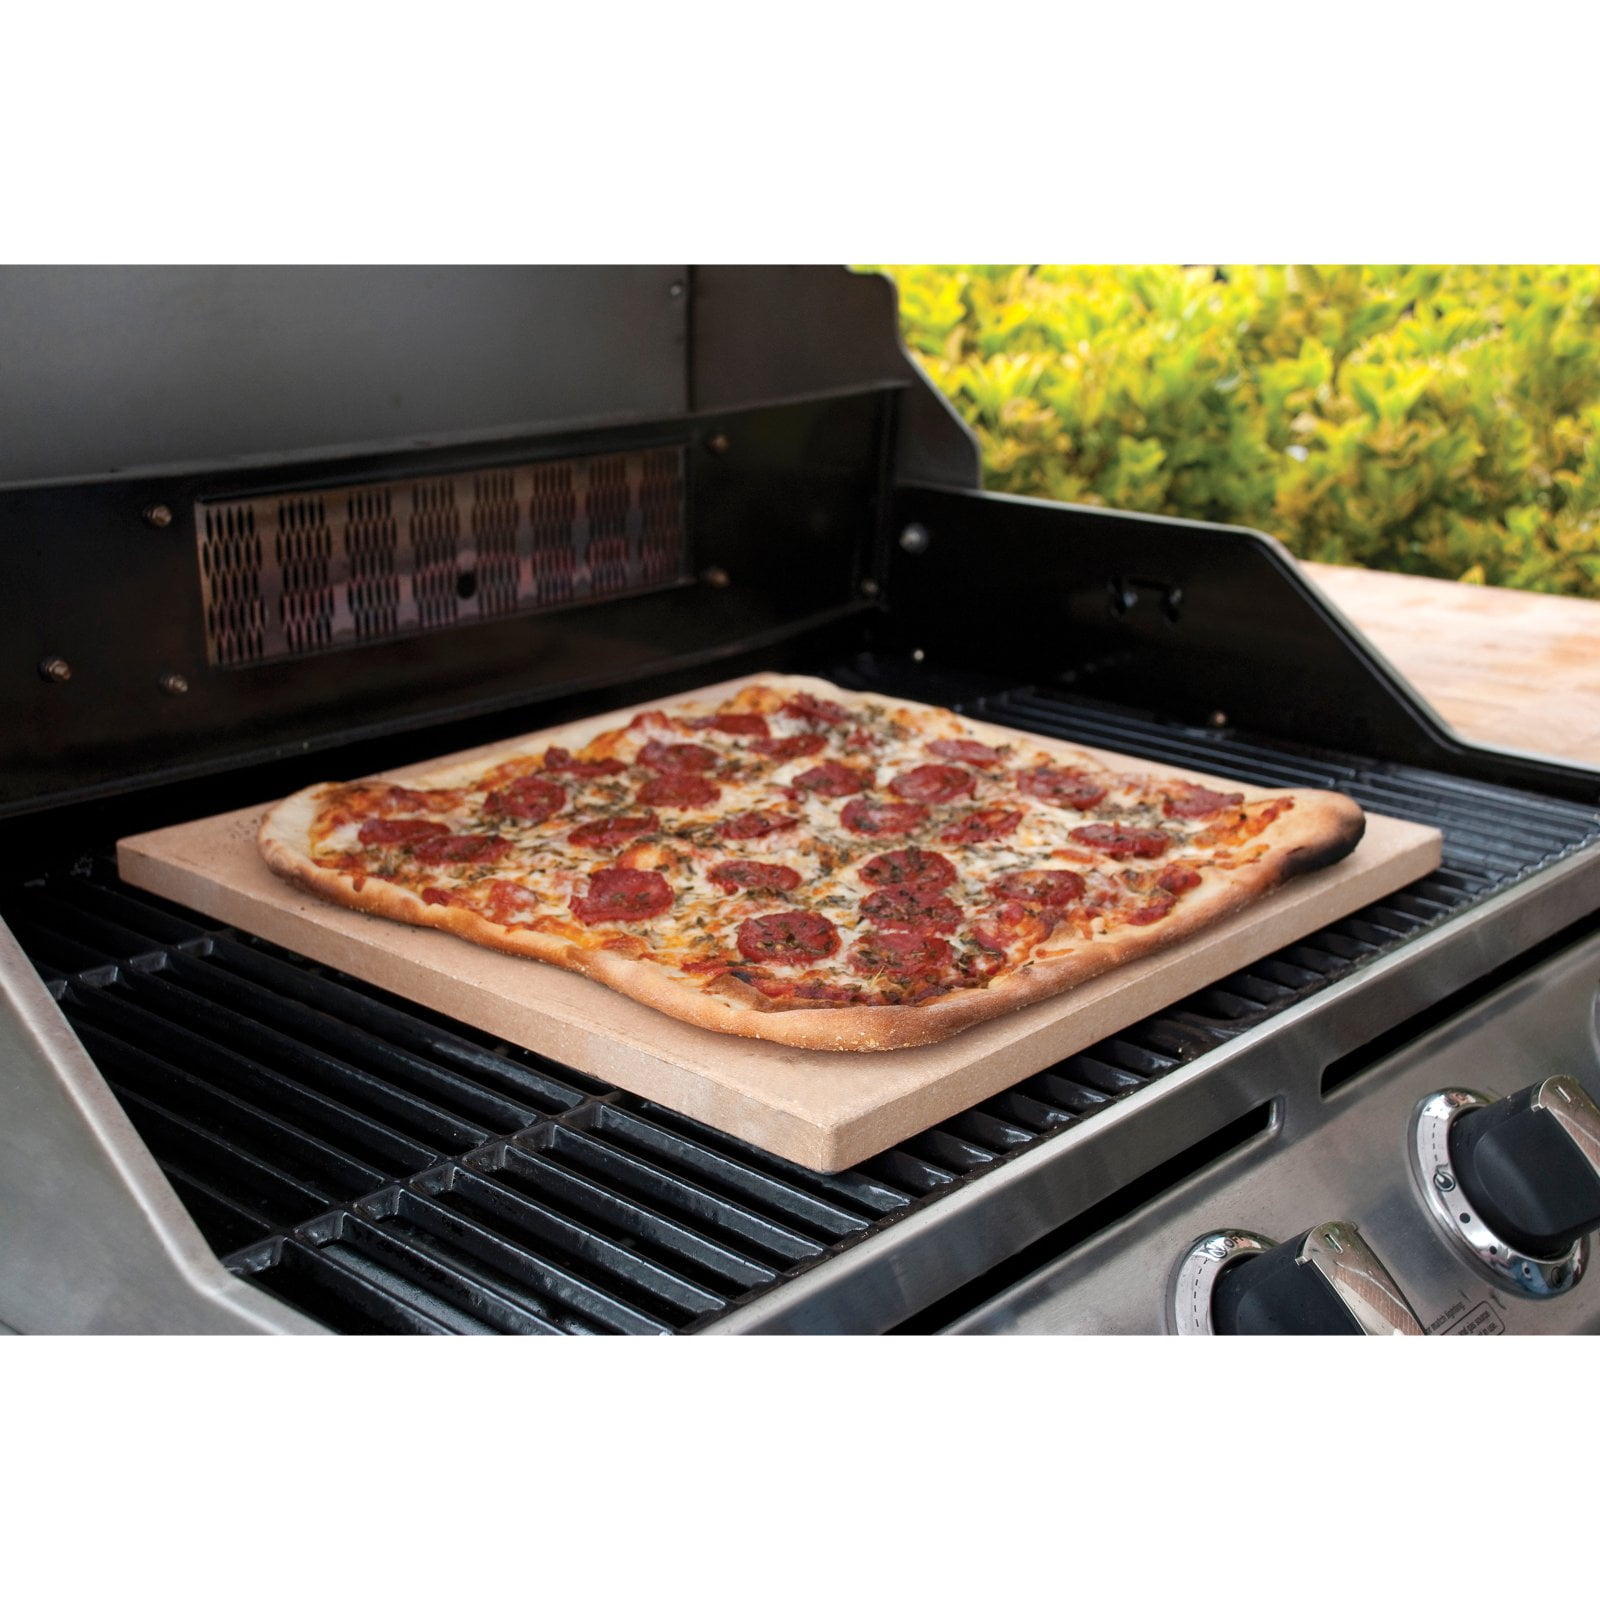 Pizza Stone For Grill Oven Bbq Grilling Accessories Square Pan 15 Baking Bread